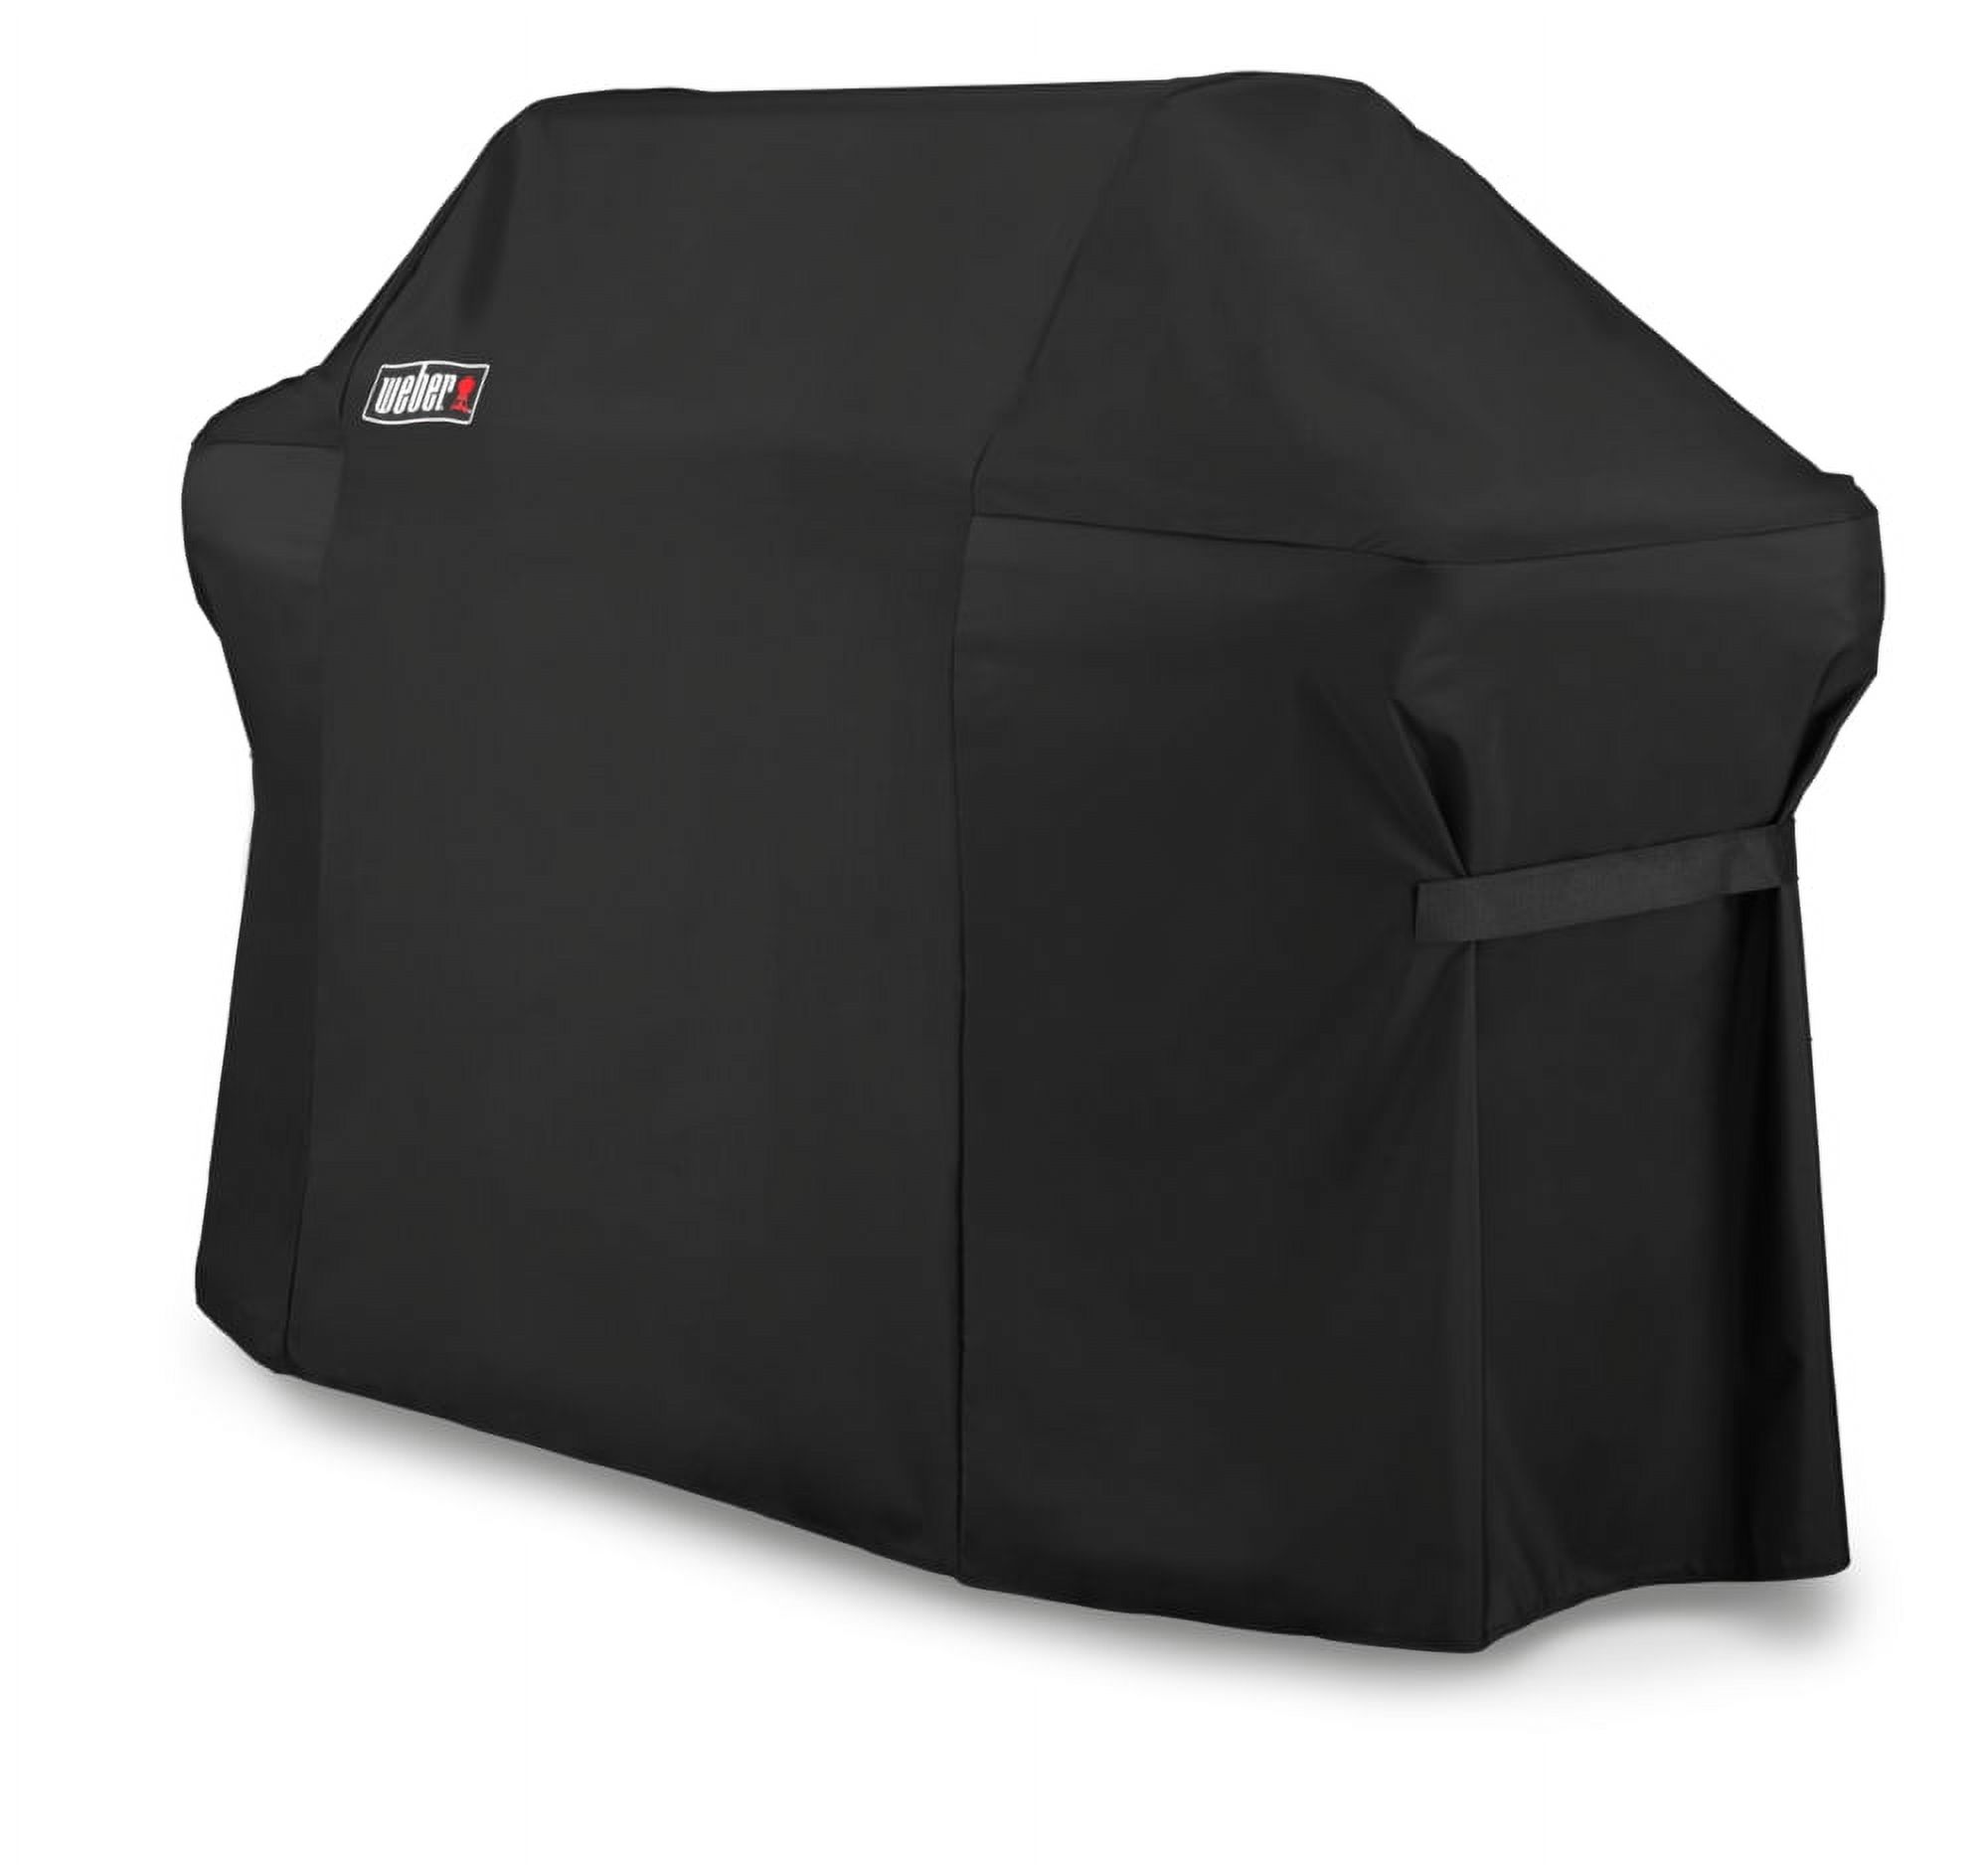 Weber Summit 600 Series Premium Grill Cover - image 3 of 8